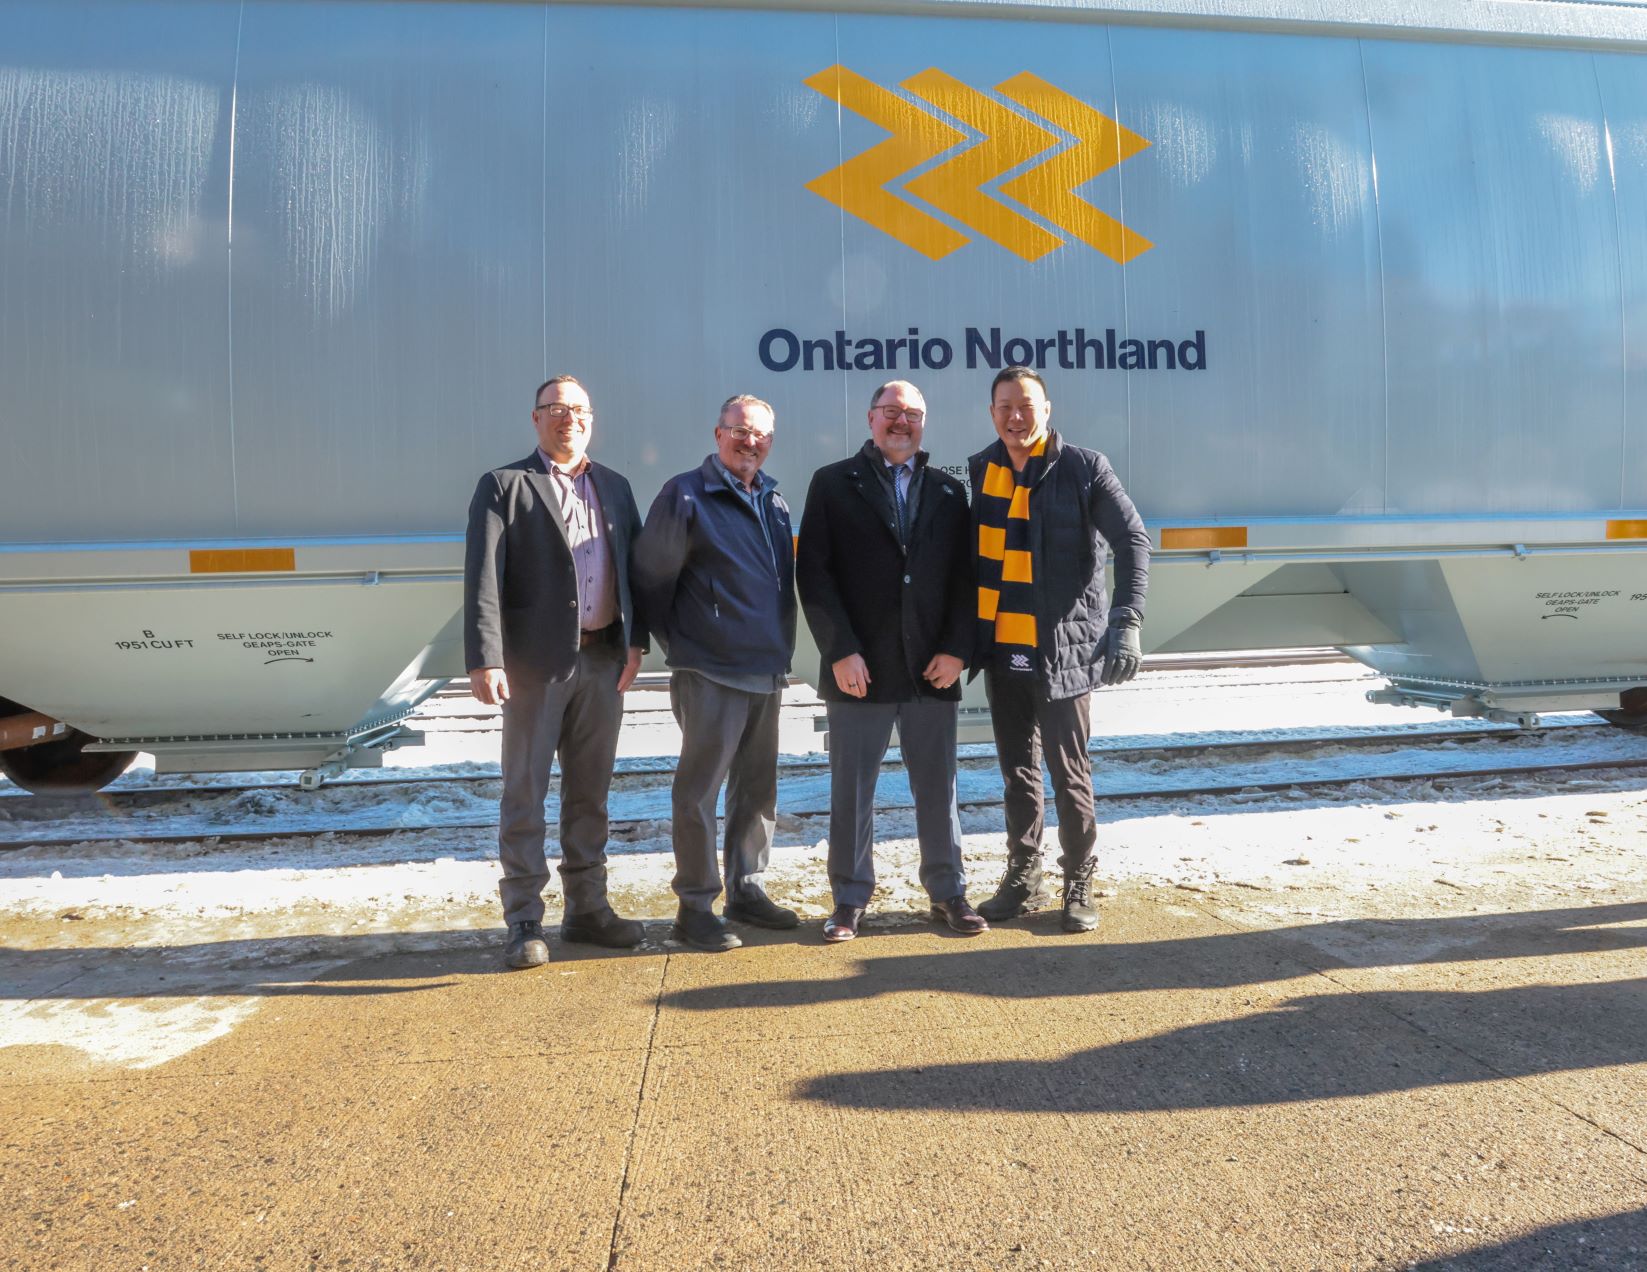 Ontario Northland on X: We were thrilled to unveil our new